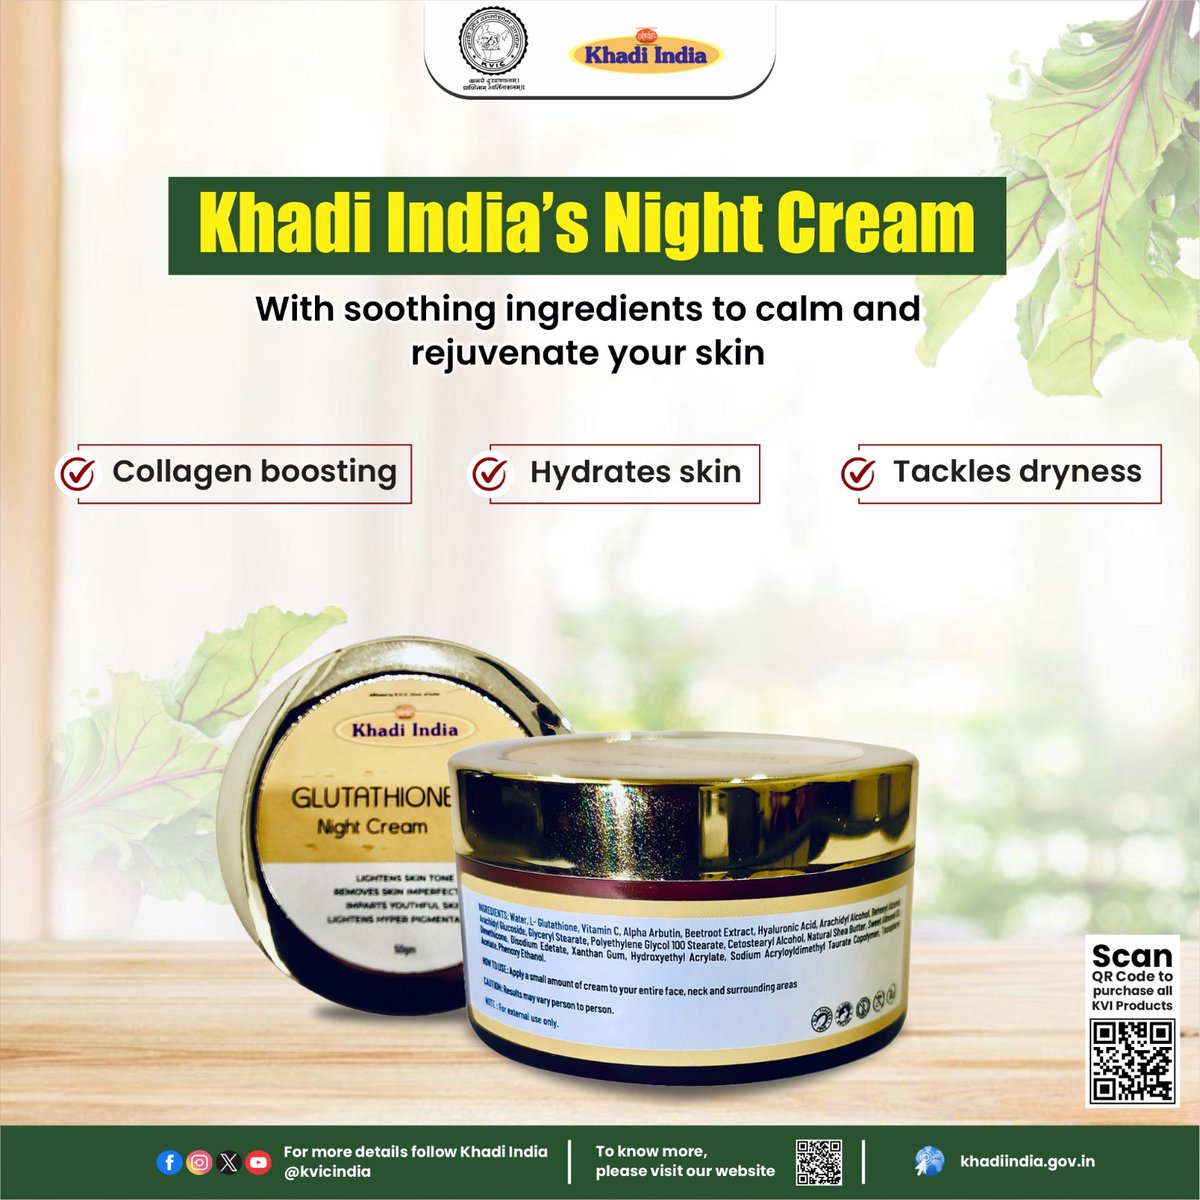 This Khadi Glutathione high-performance night cream is enriched with glutathione, along with the purest and most effective nourishers, natural antioxidants, and actives including Beetroot Extract, Hyaluronic Acid, Glyceryl Stearate and many more. Visit your nearest #Khadi store